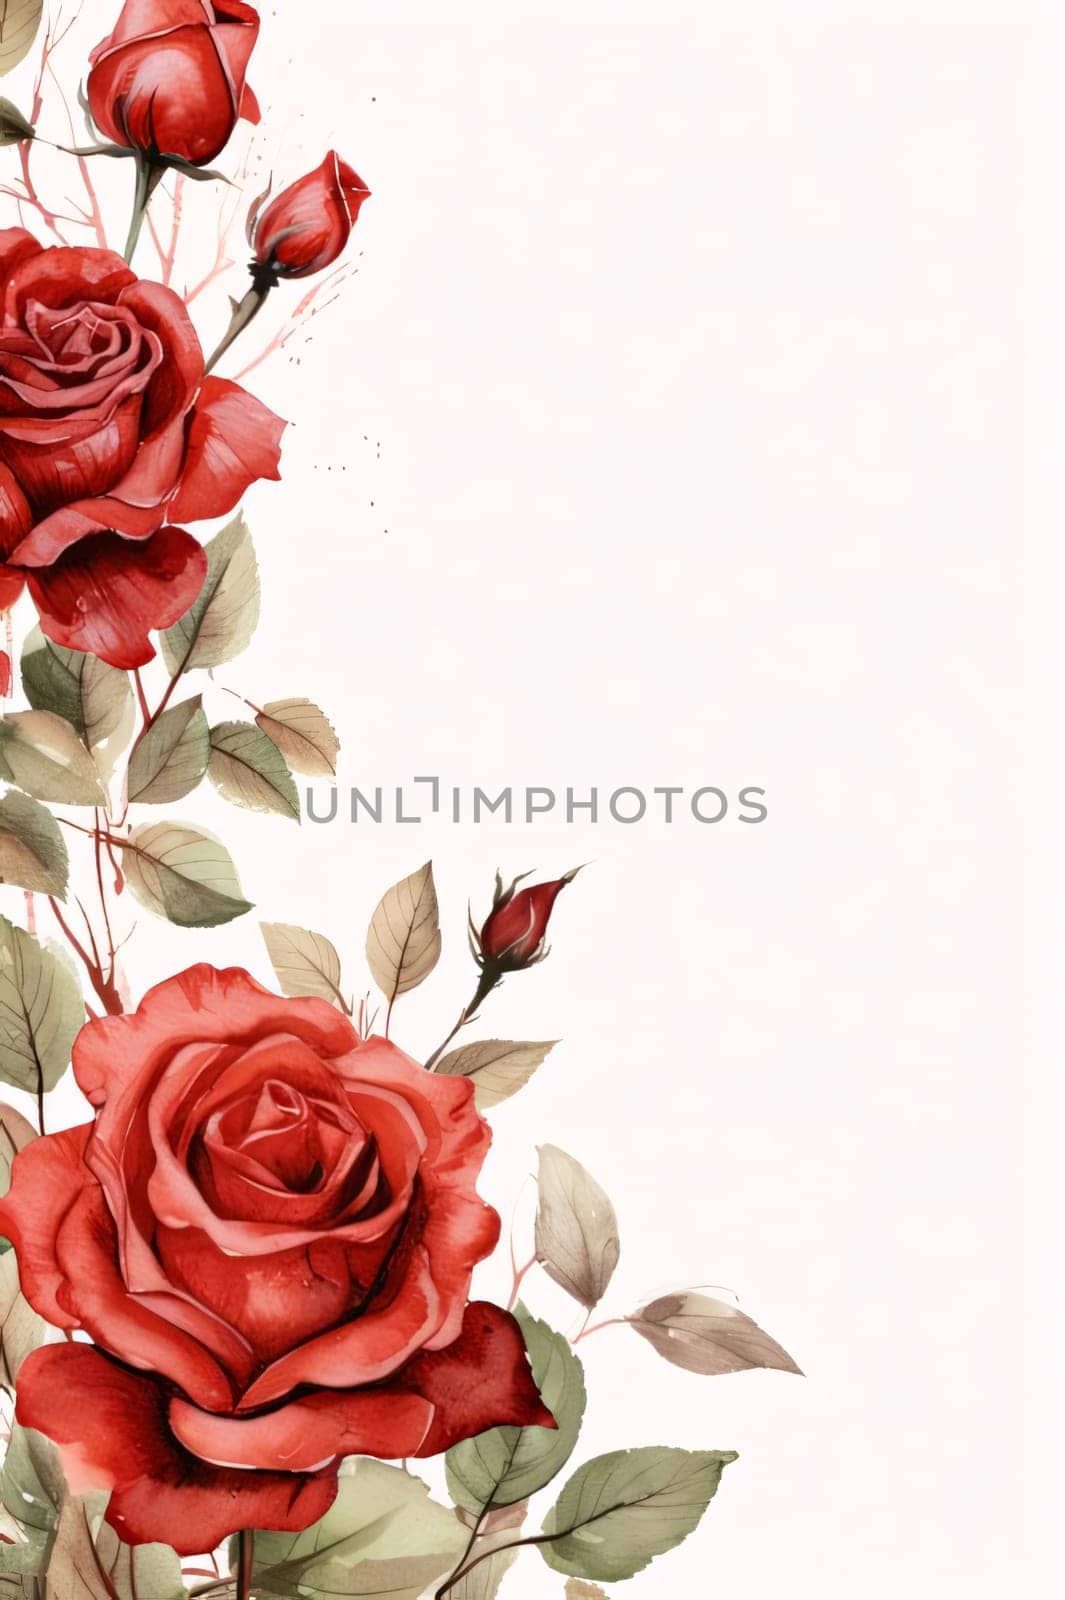 Had a blank card decorated with red roses with leaves.Valentine's Day banner with space for your own content. Heart as a symbol of affection and love.